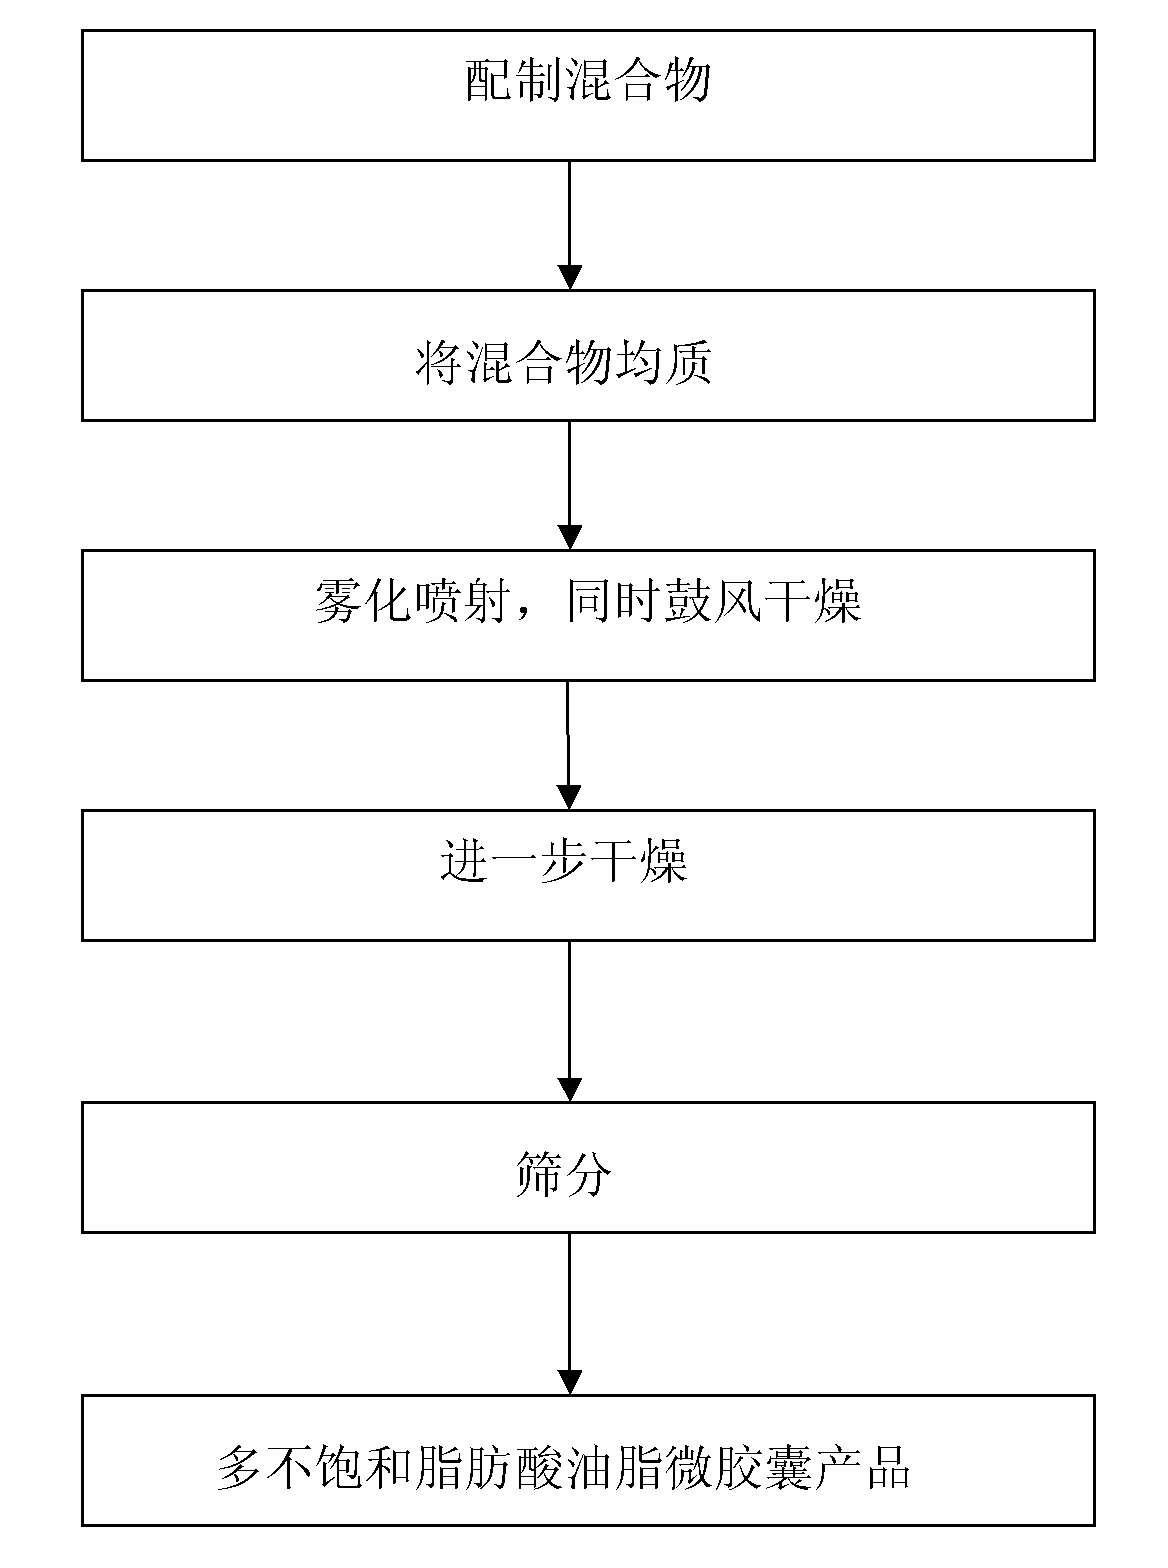 Preparation technology for polyunsaturated fatty acid oil microcapsule